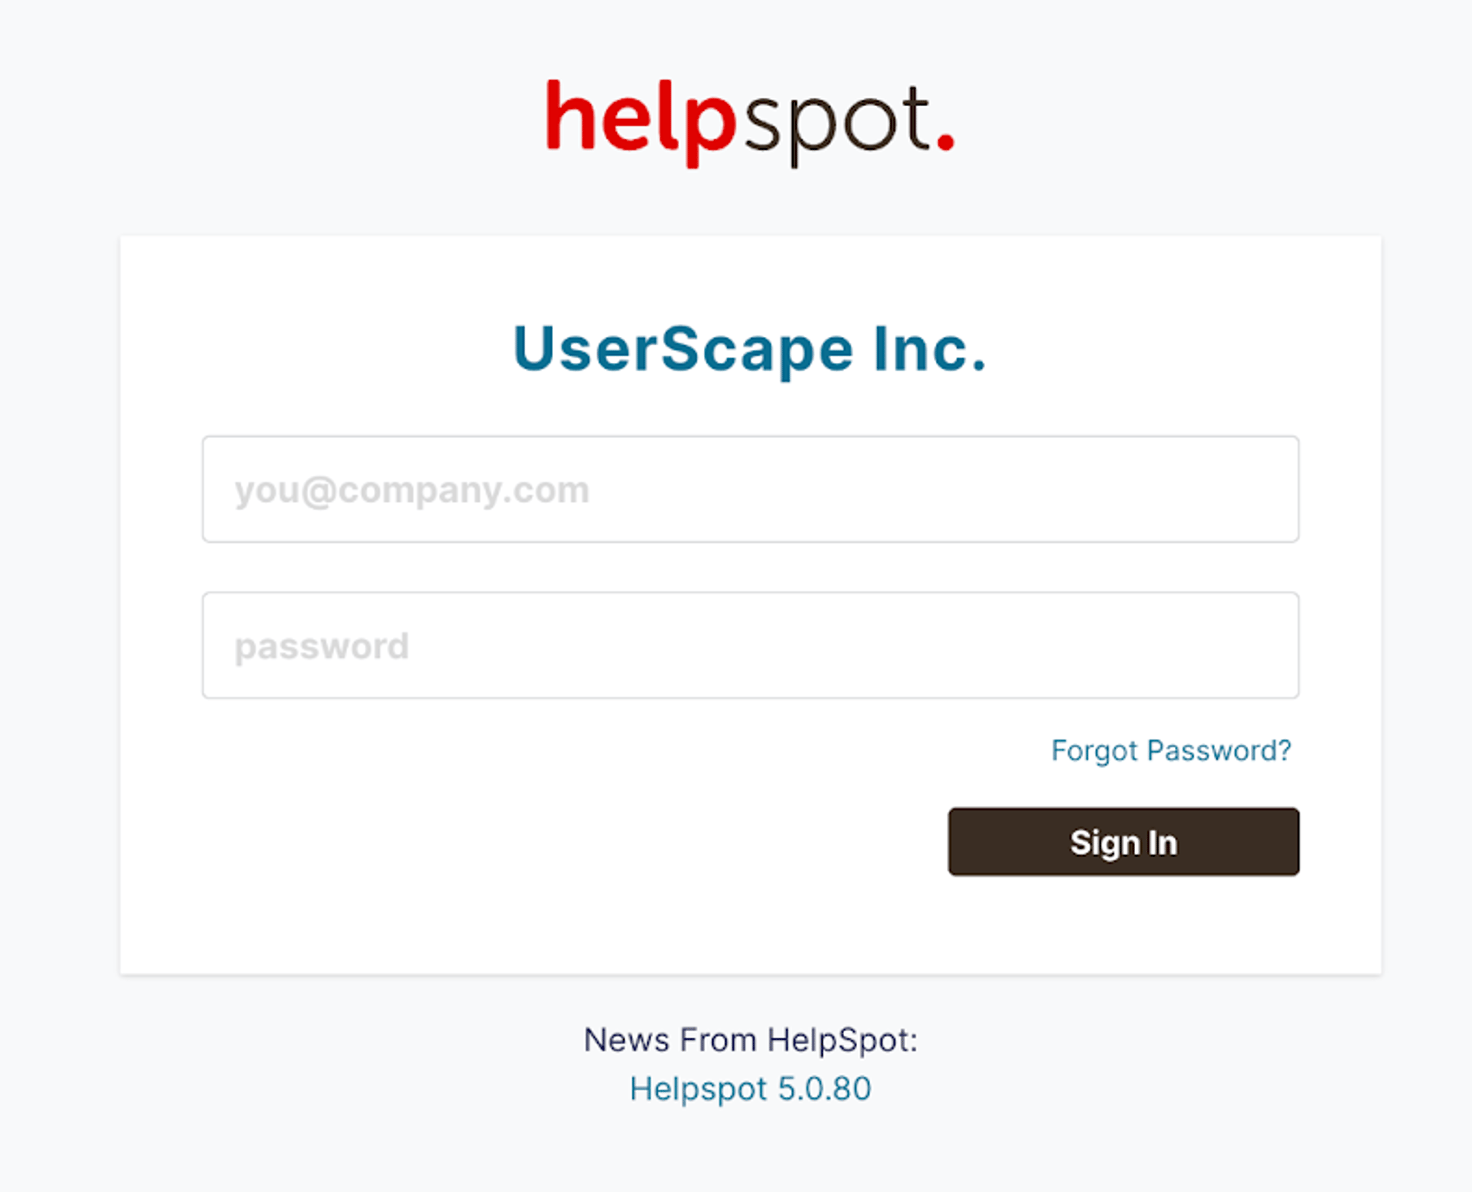 HelpSpot's shared inbox management tool has two-factor authentication for security purposes.